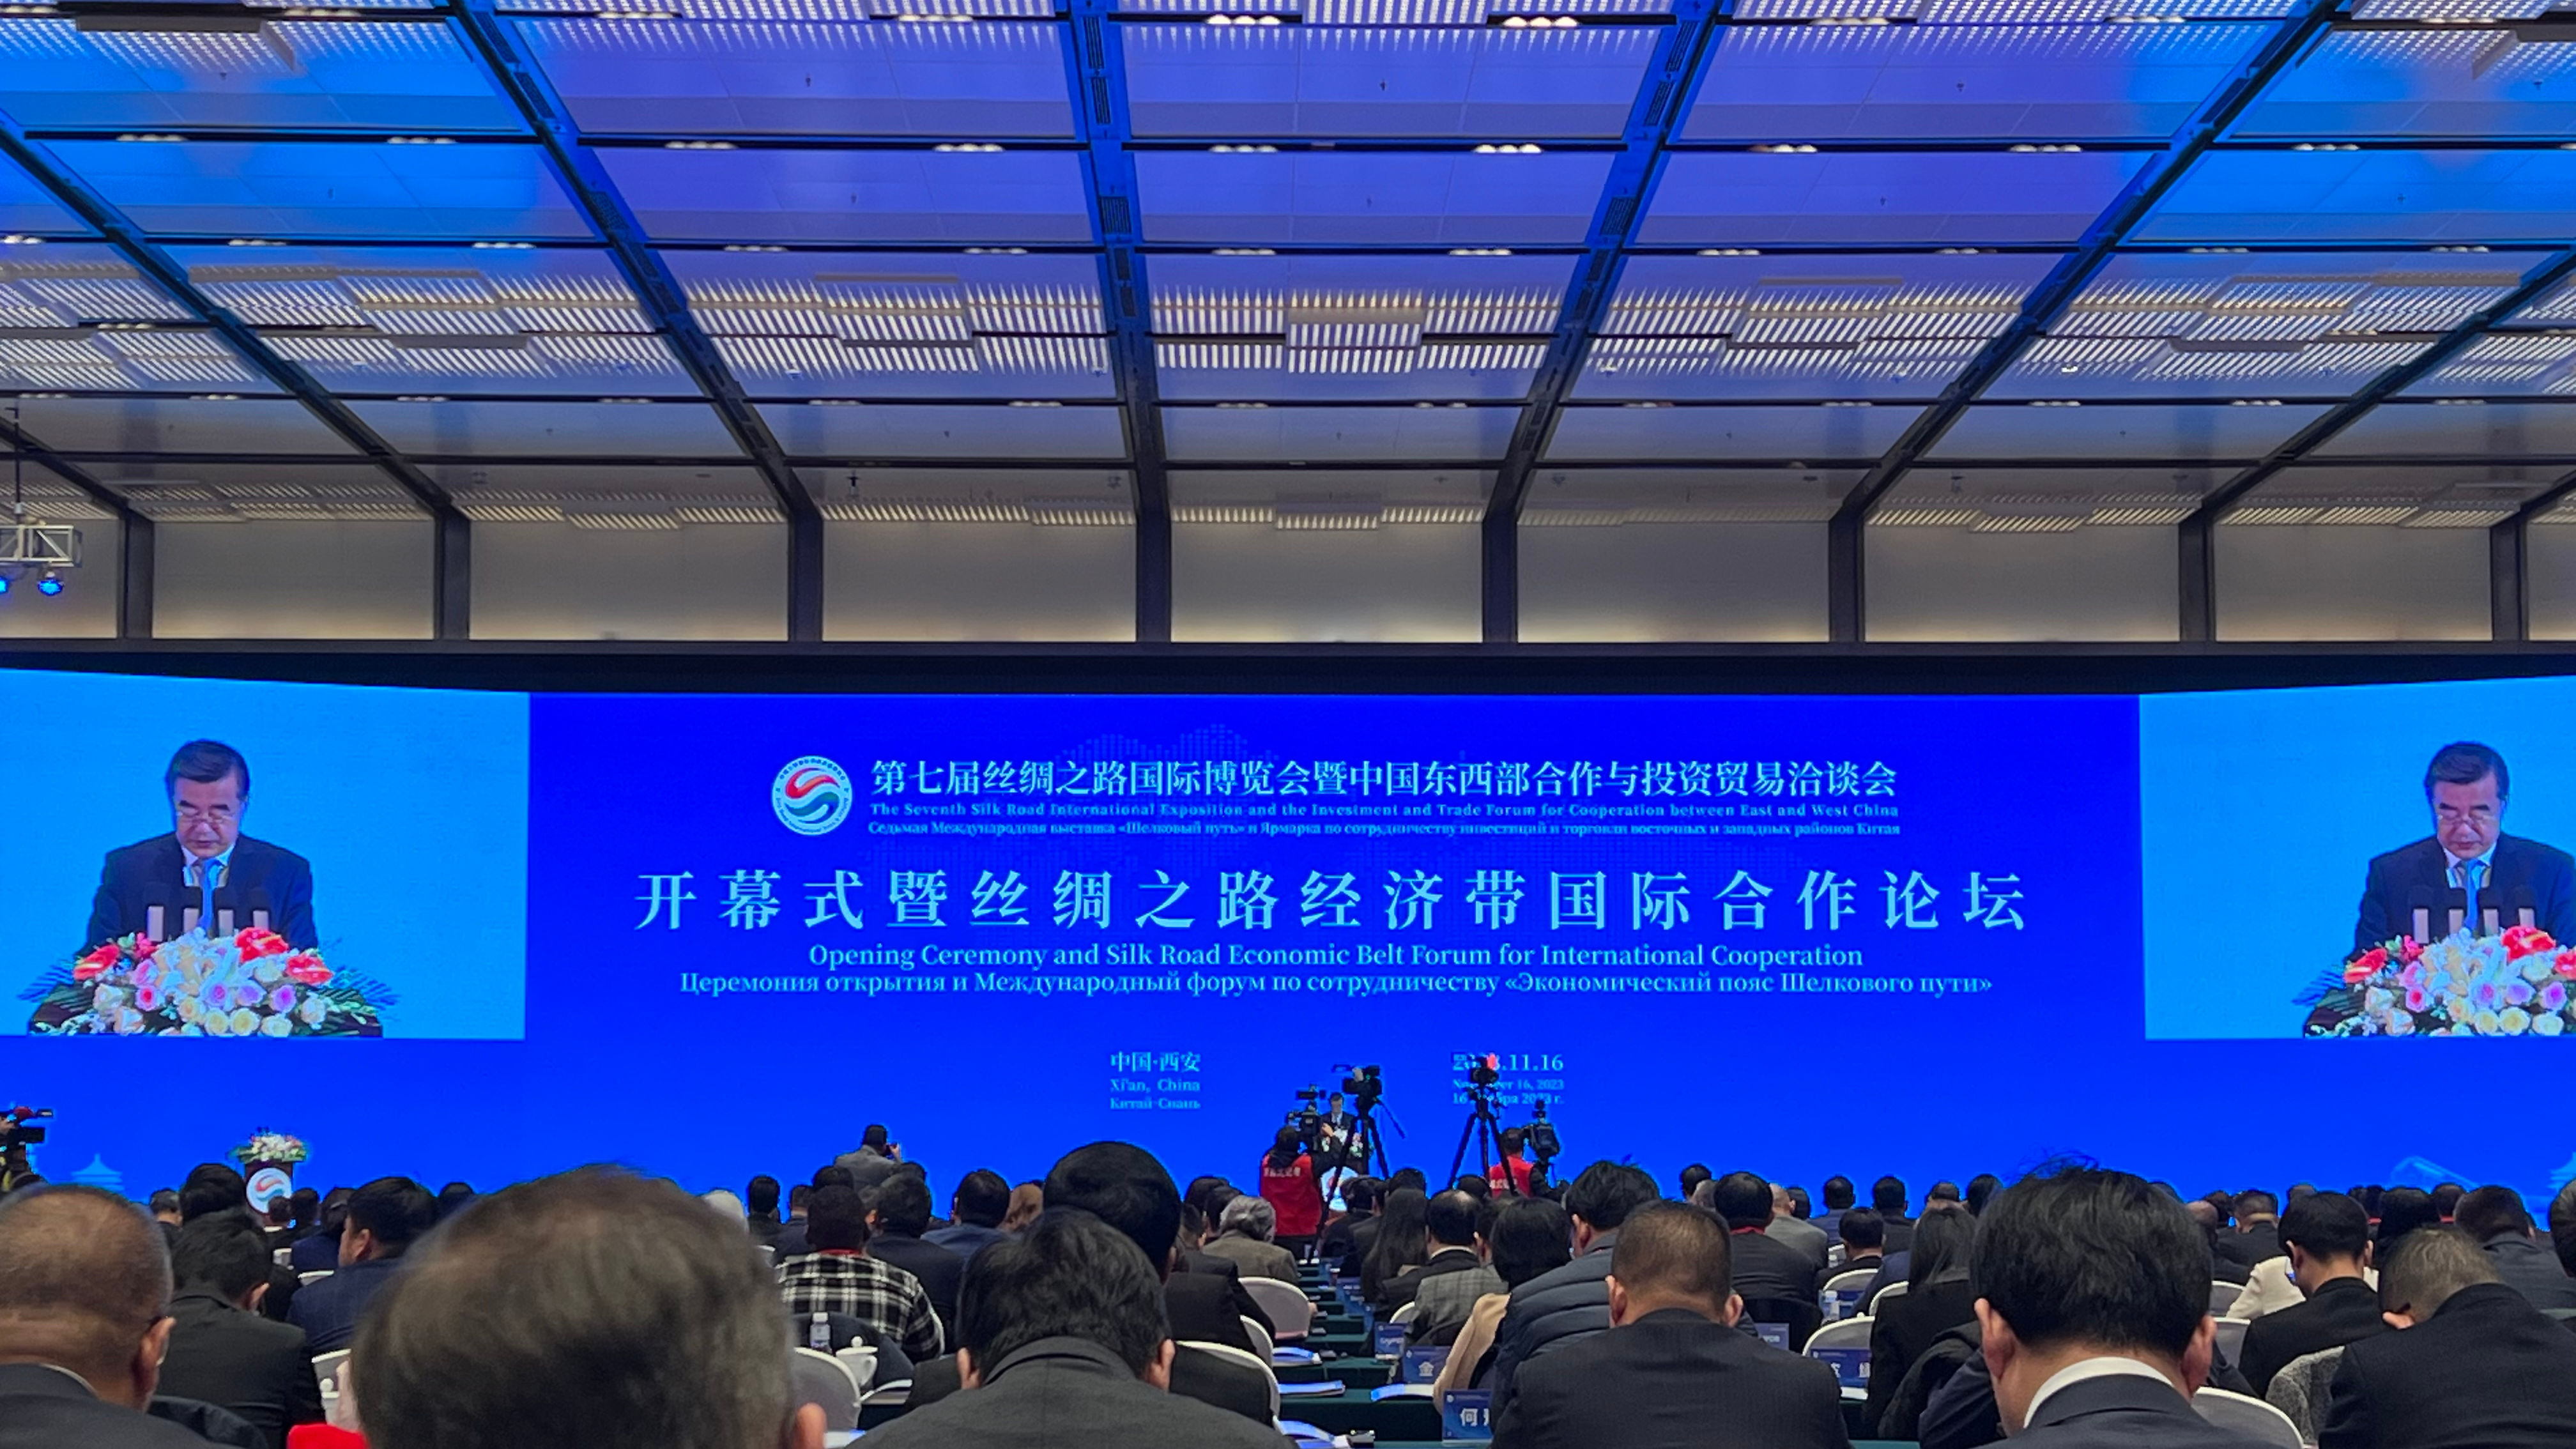 A view of the opening ceremony and the Silk Road Economic Belt Forum for International Cooperation, Xi'an, Shaanxi Province, northwest China, November 16, 2023. /CGTN